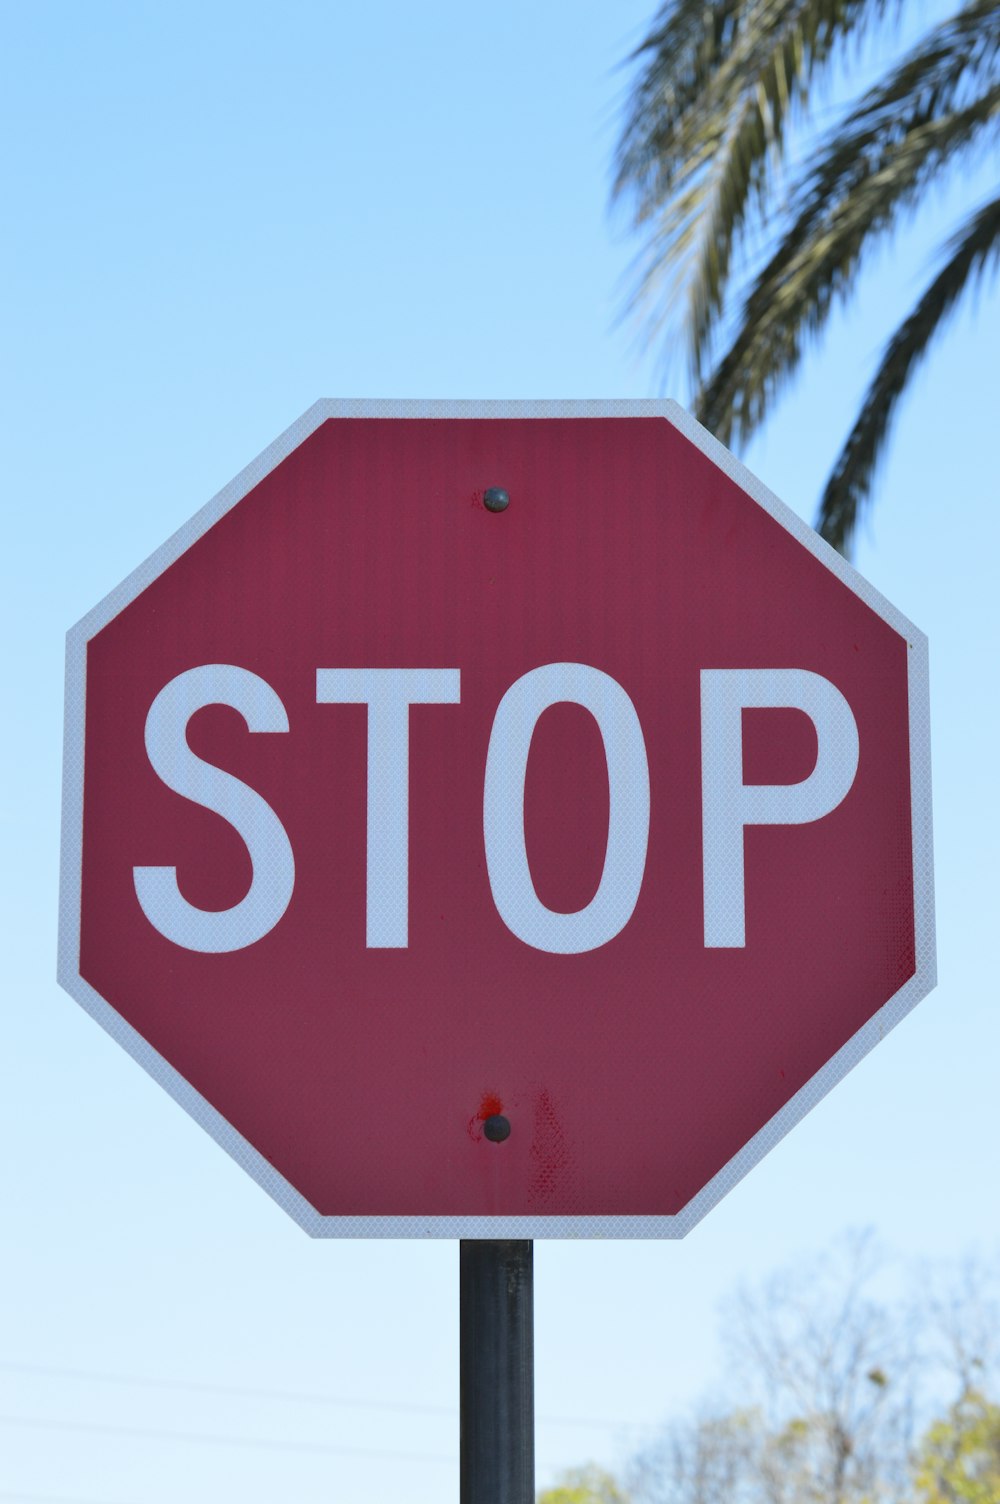 red stop sign near palm tree